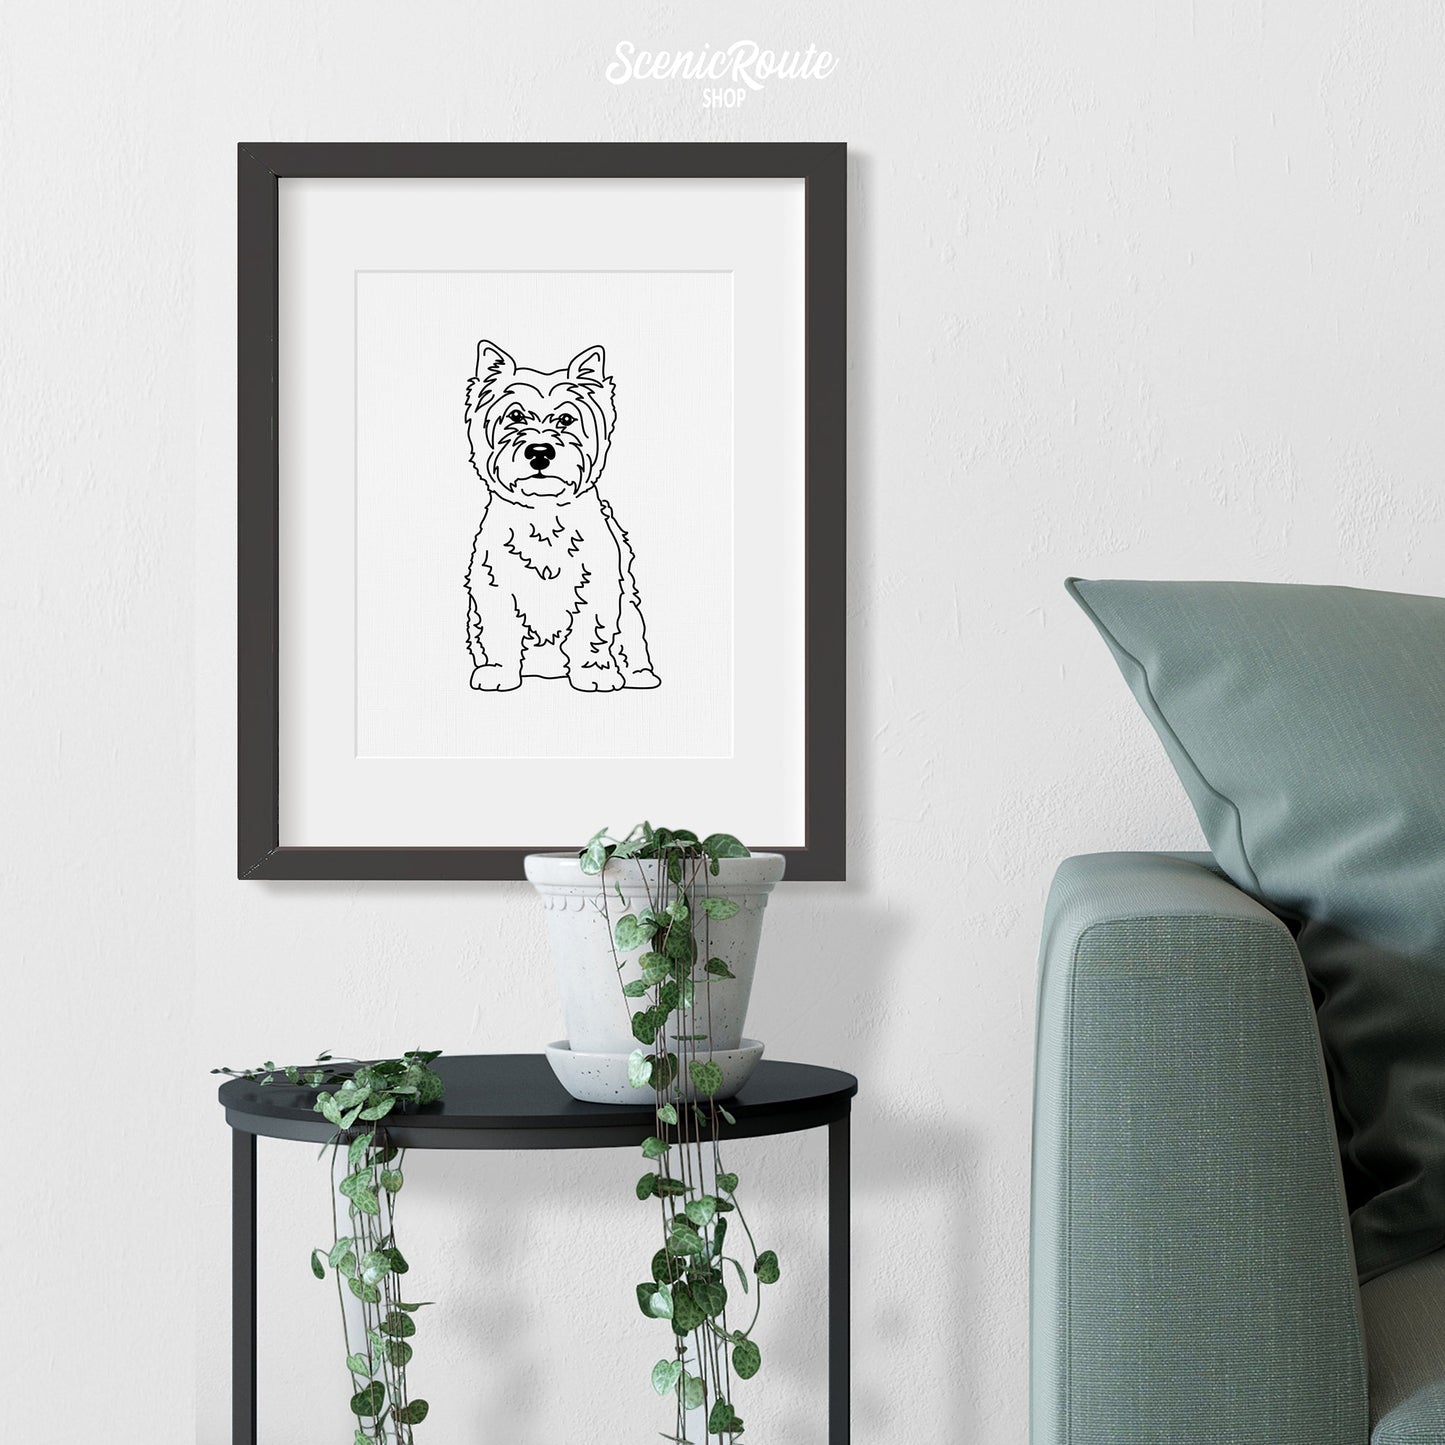 A framed line art drawing of a West Highland Terrier dog above a table with a plant next to a couch